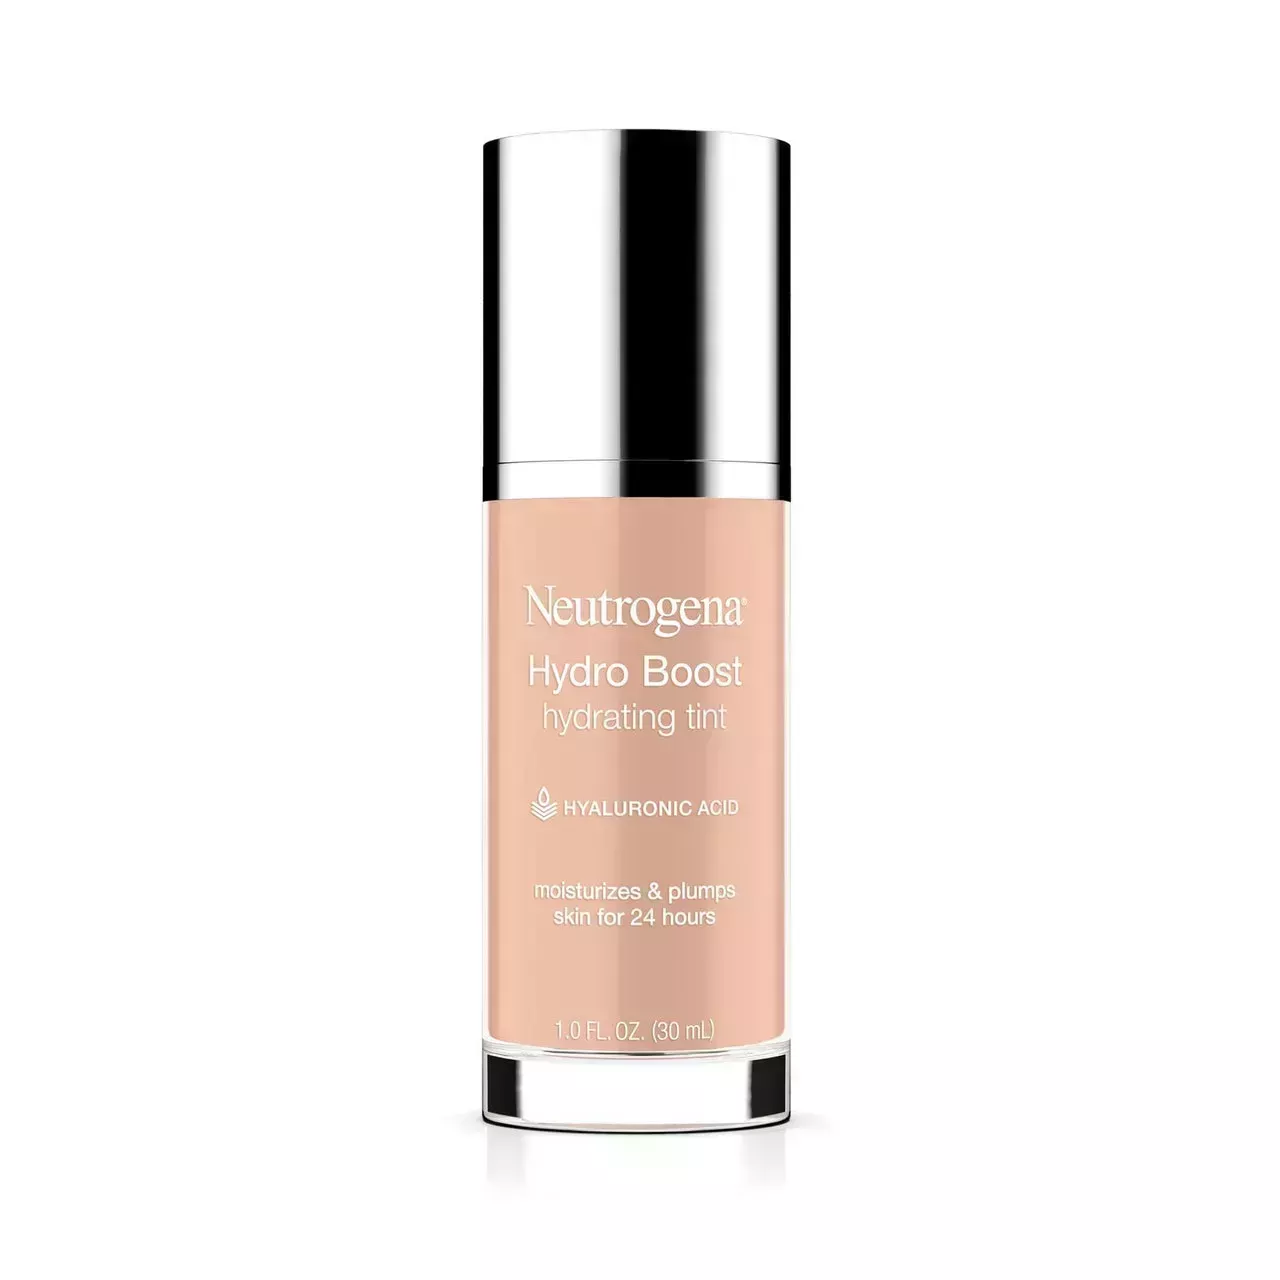 Neutrogena Hydro Boost Hydrating Tint transparent bottle of foundation with silver chrome cap on white background